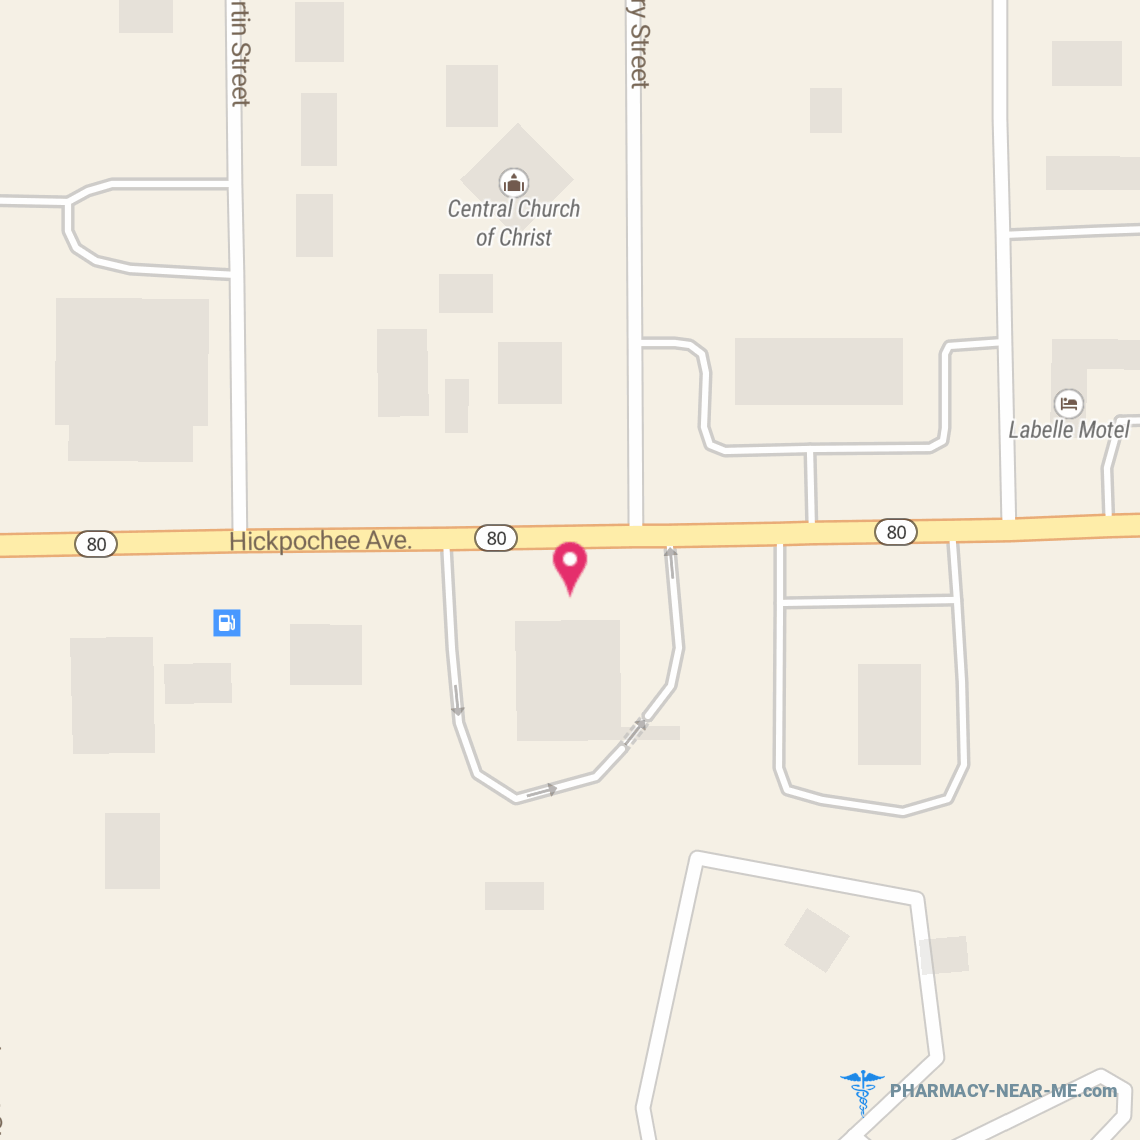 K & M DRUGS - Pharmacy Hours, Phone, Reviews & Information: Highway 80, Labelle, Florida 33935, United States